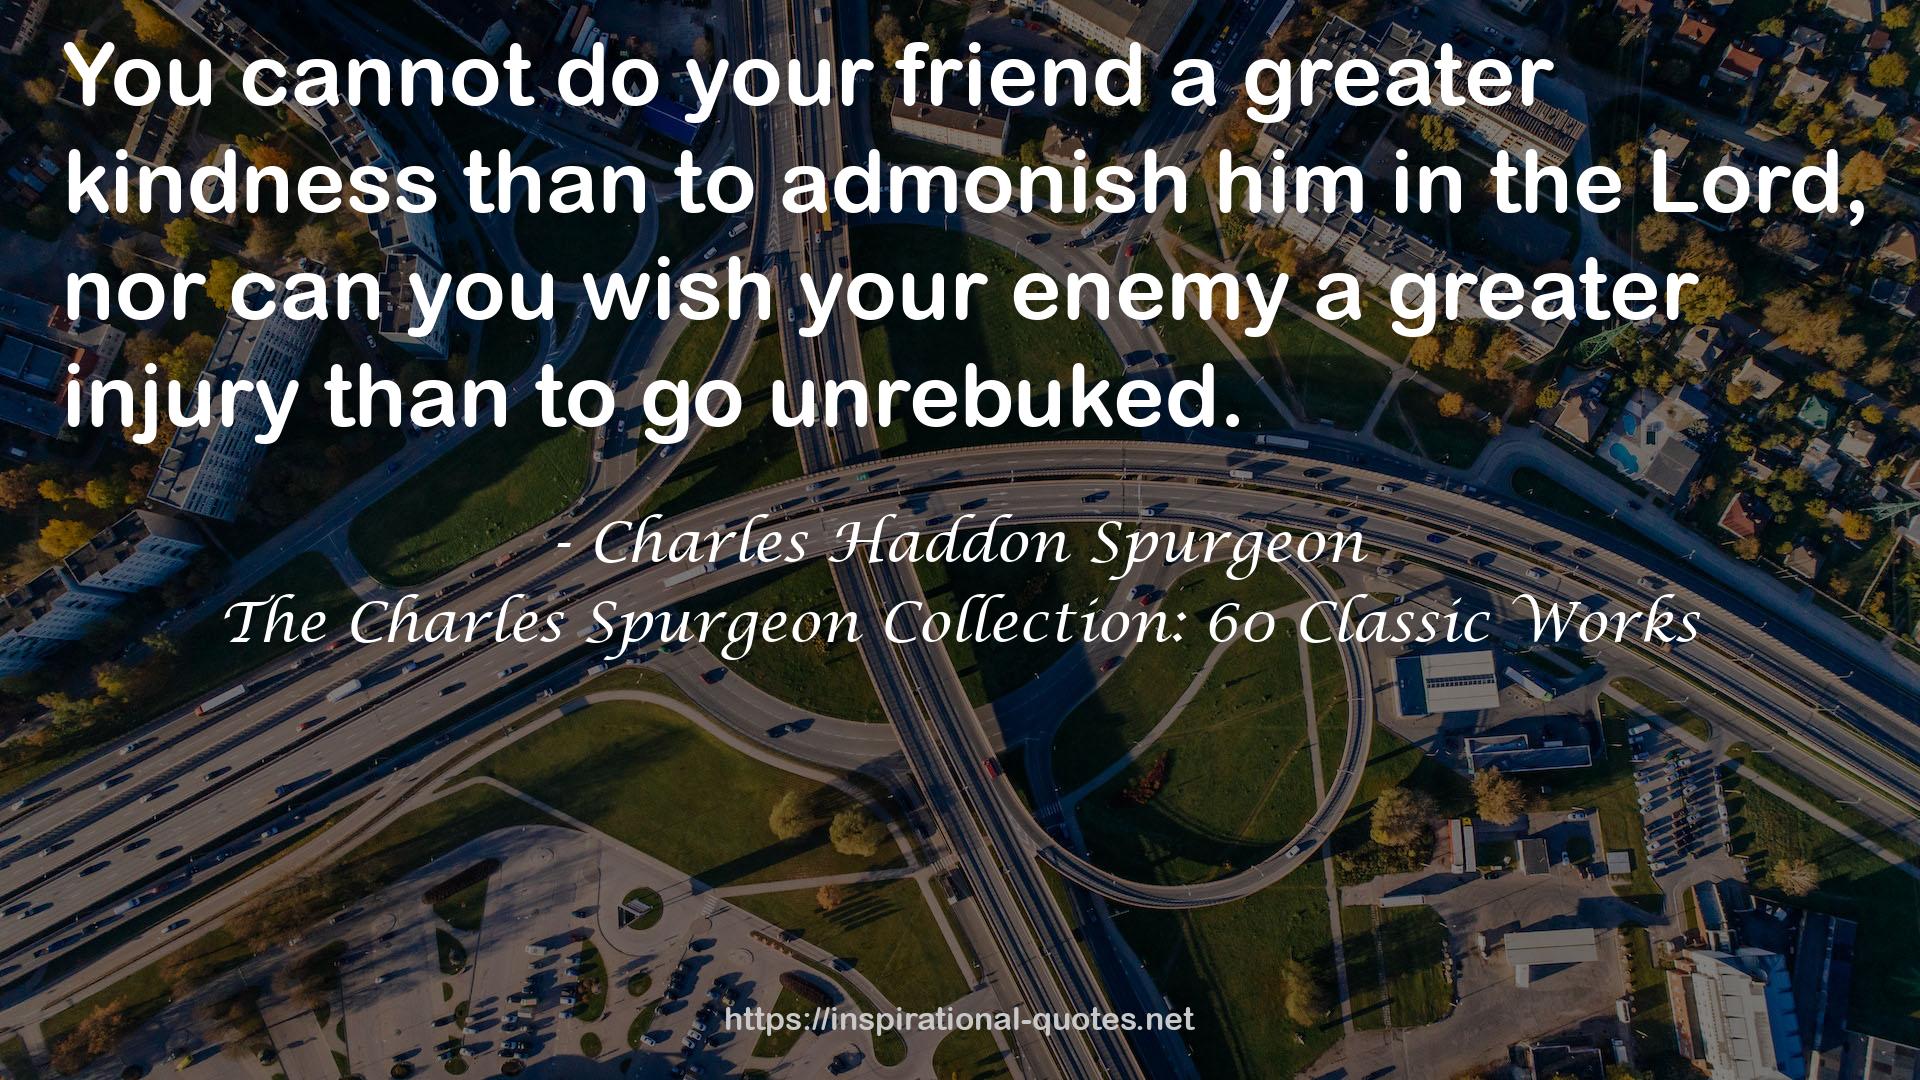 The Charles Spurgeon Collection: 60 Classic Works QUOTES